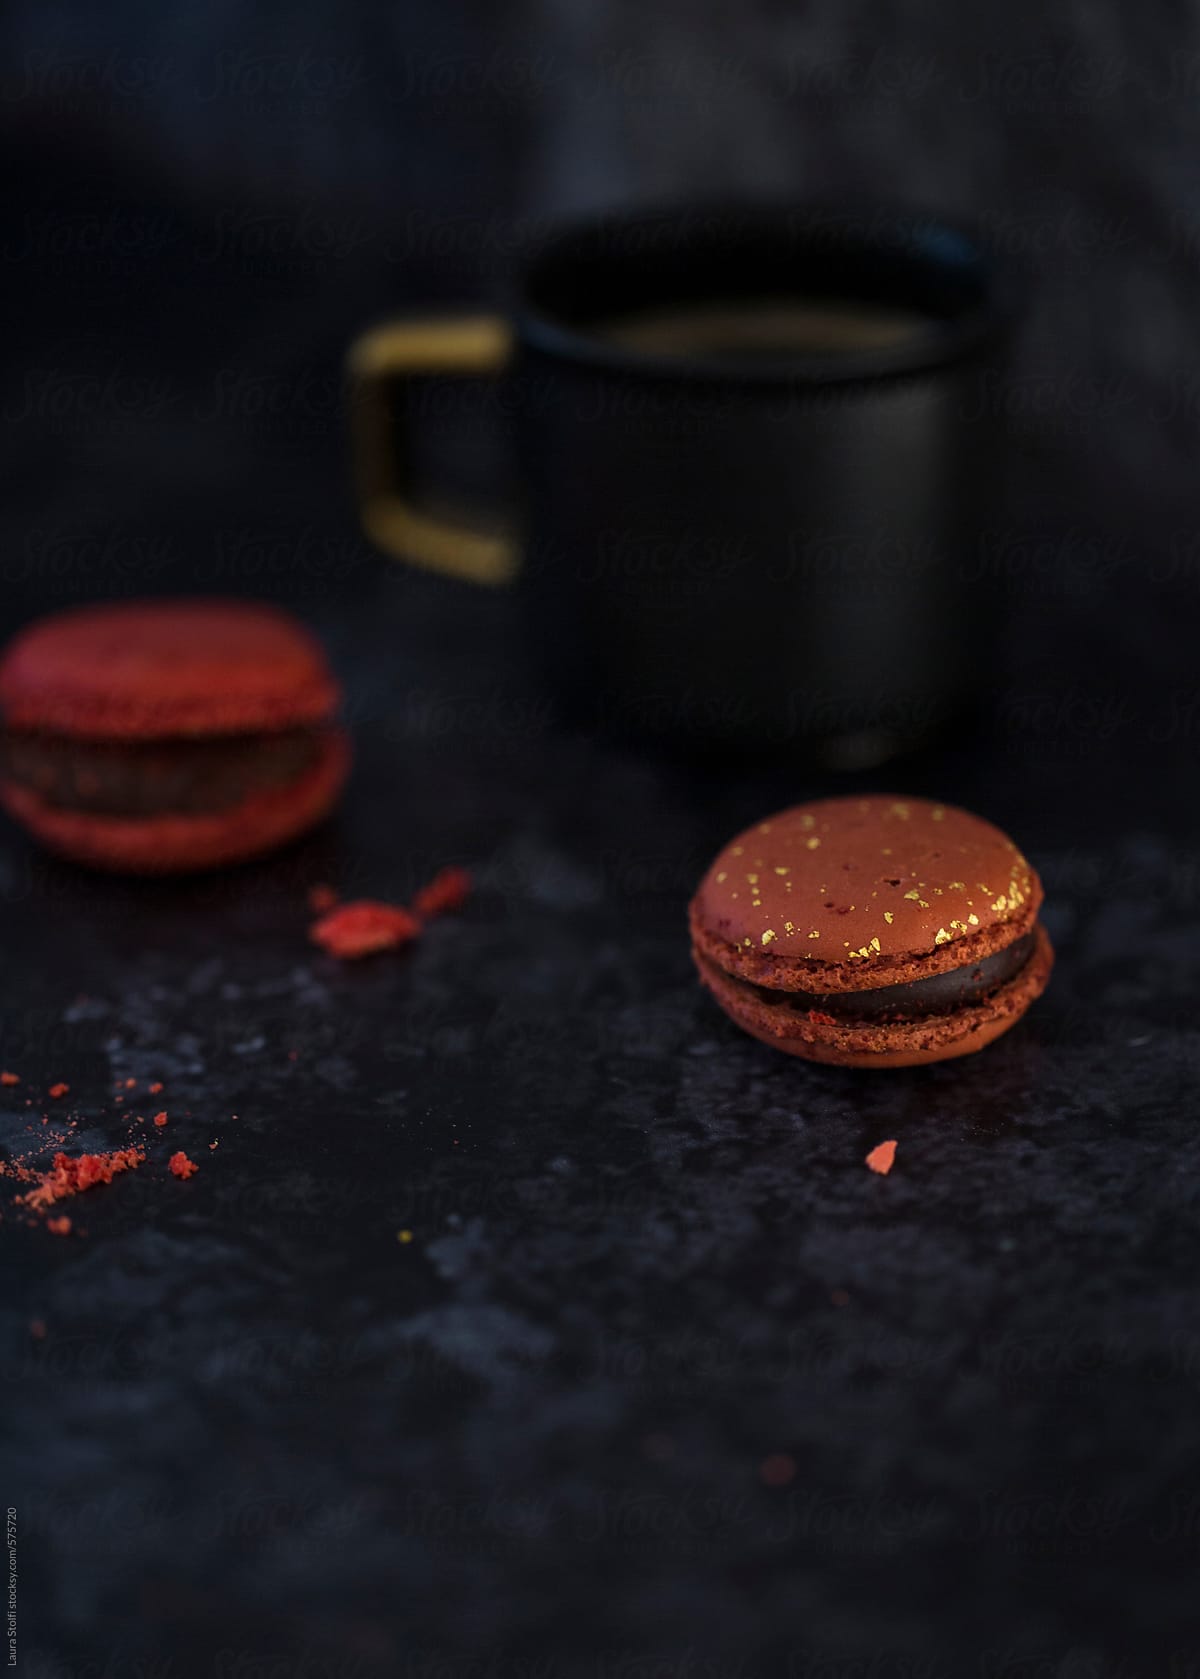 Colourful macaron biscuits and espresso coffee